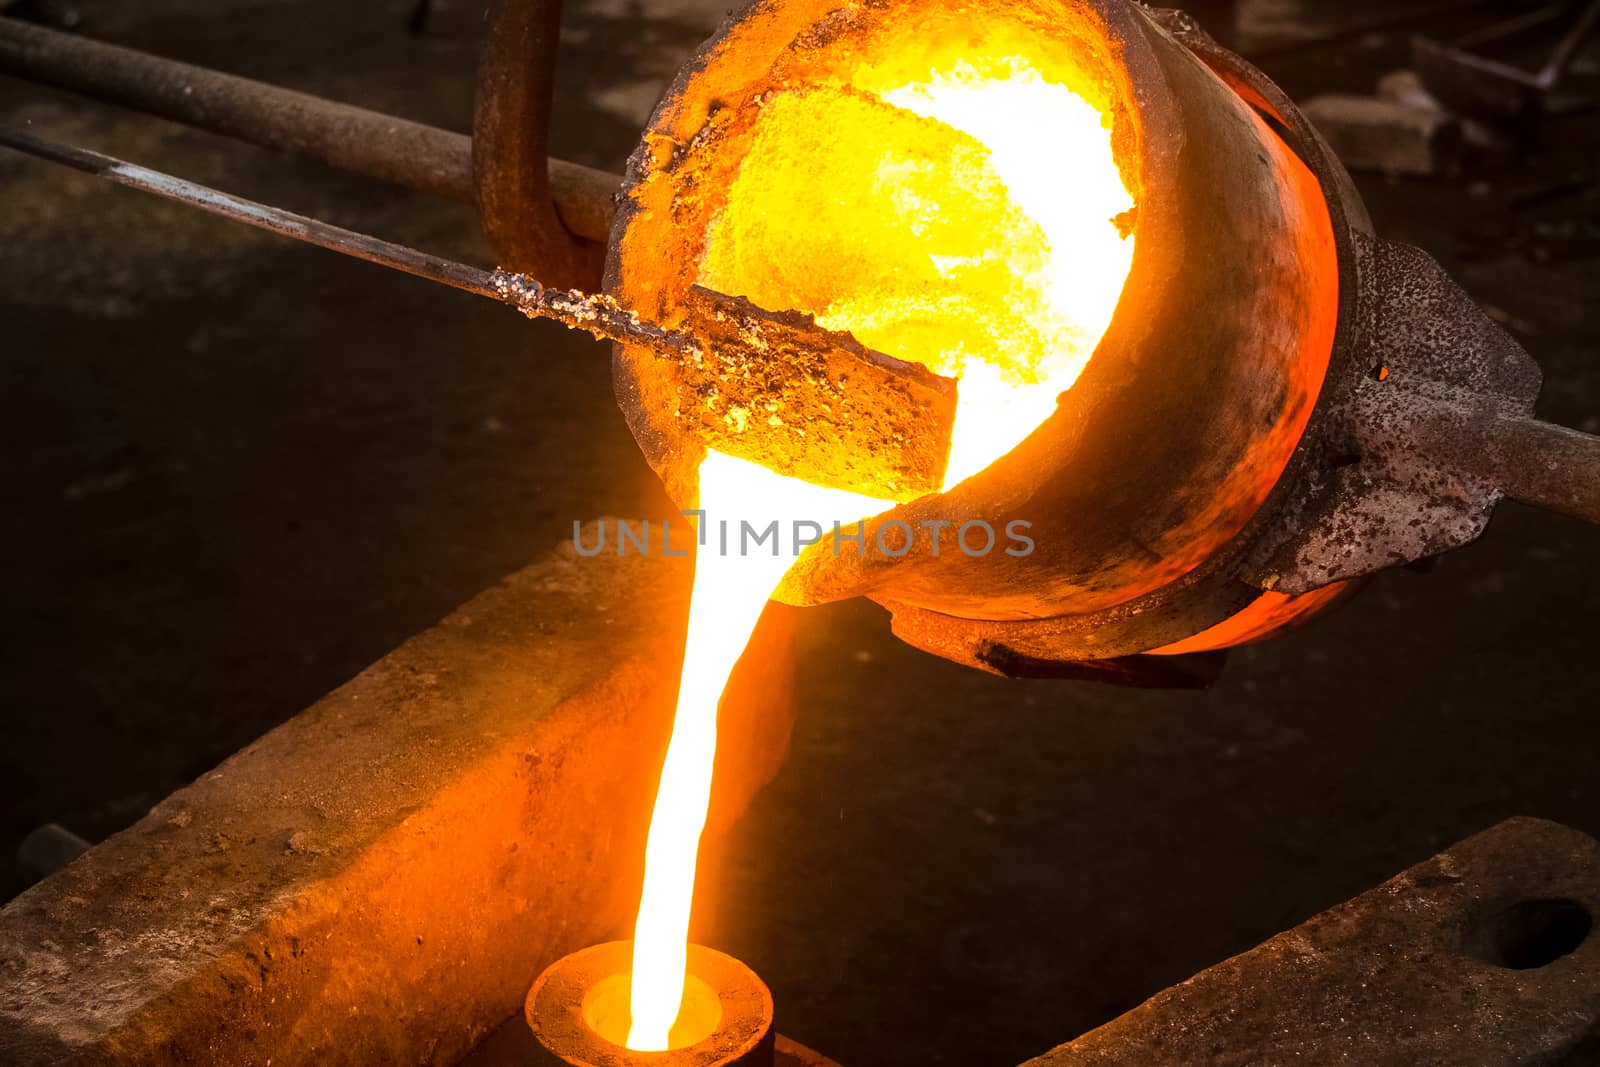 A large bowl of molten metal at a steel mill. Steel production.